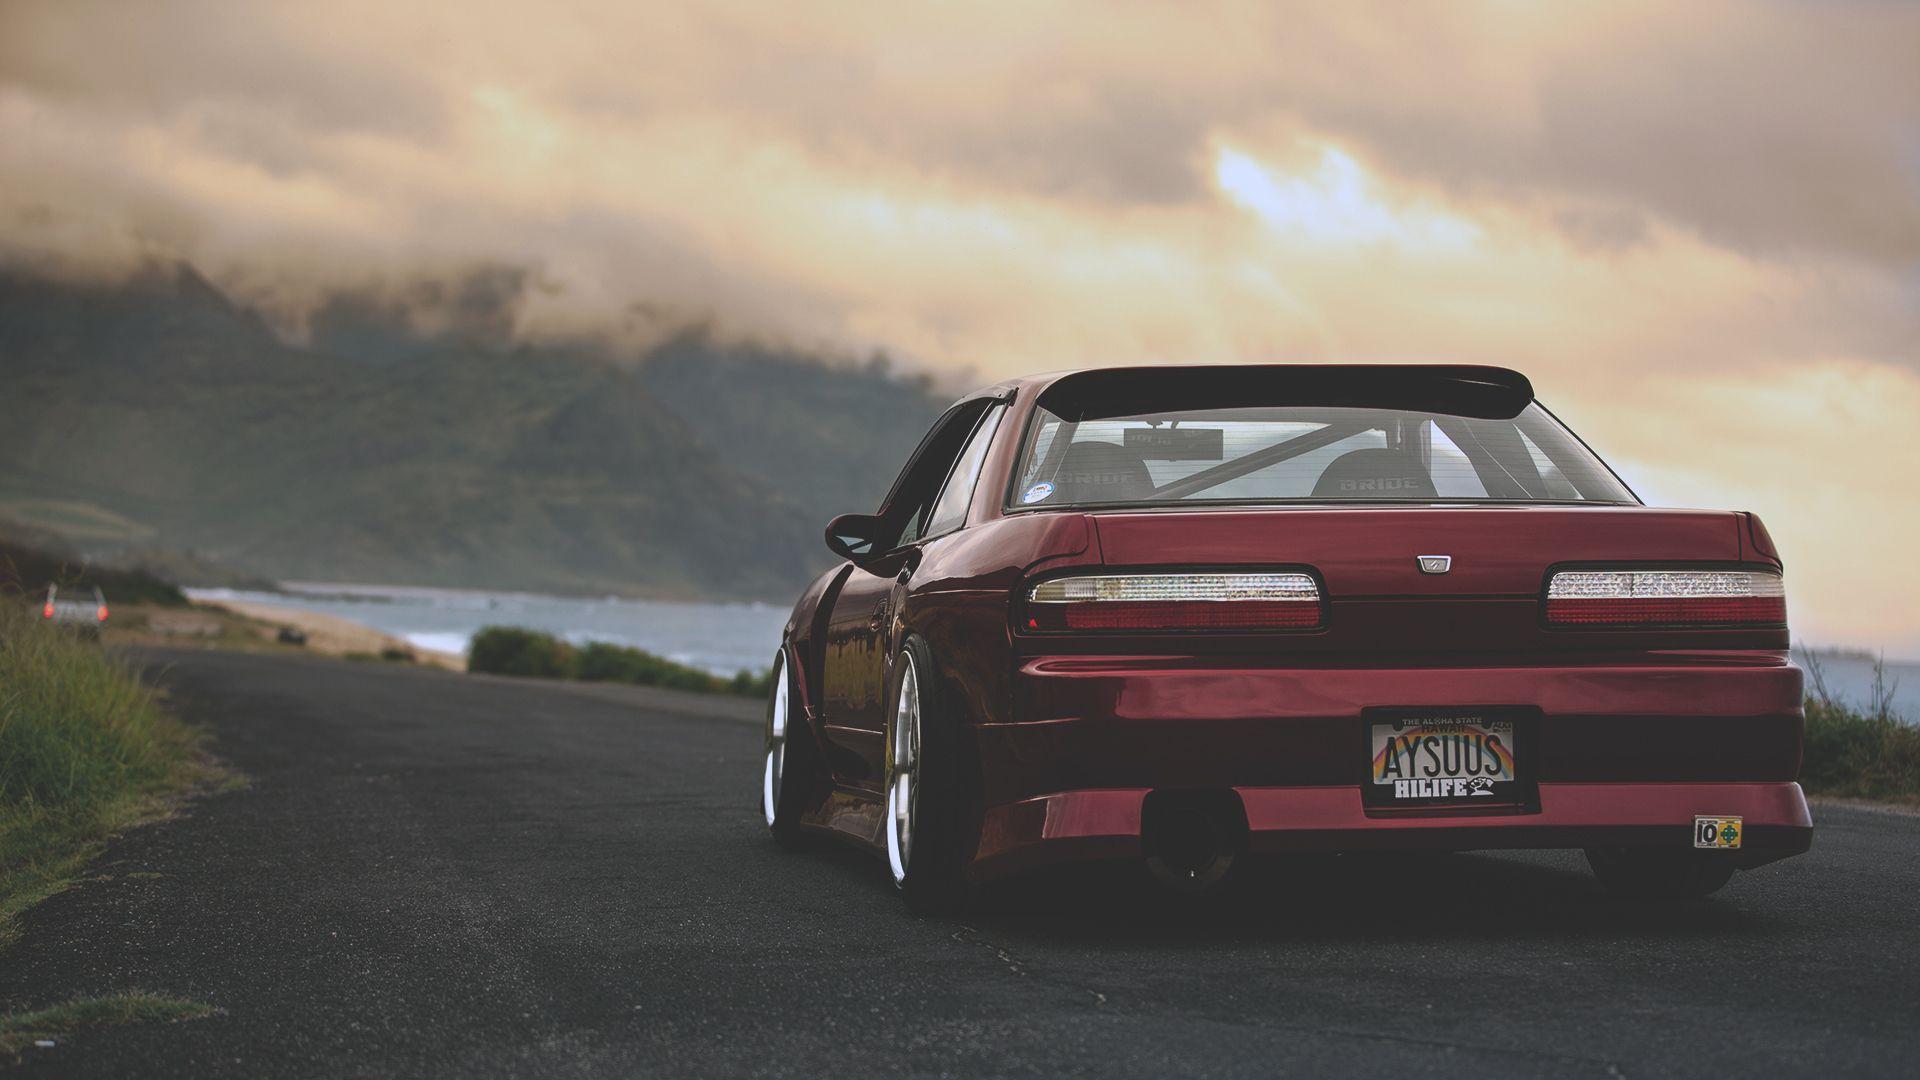 Download Wallpaper 1920x1080 Nissan, Silvia, Red, Rear View Full